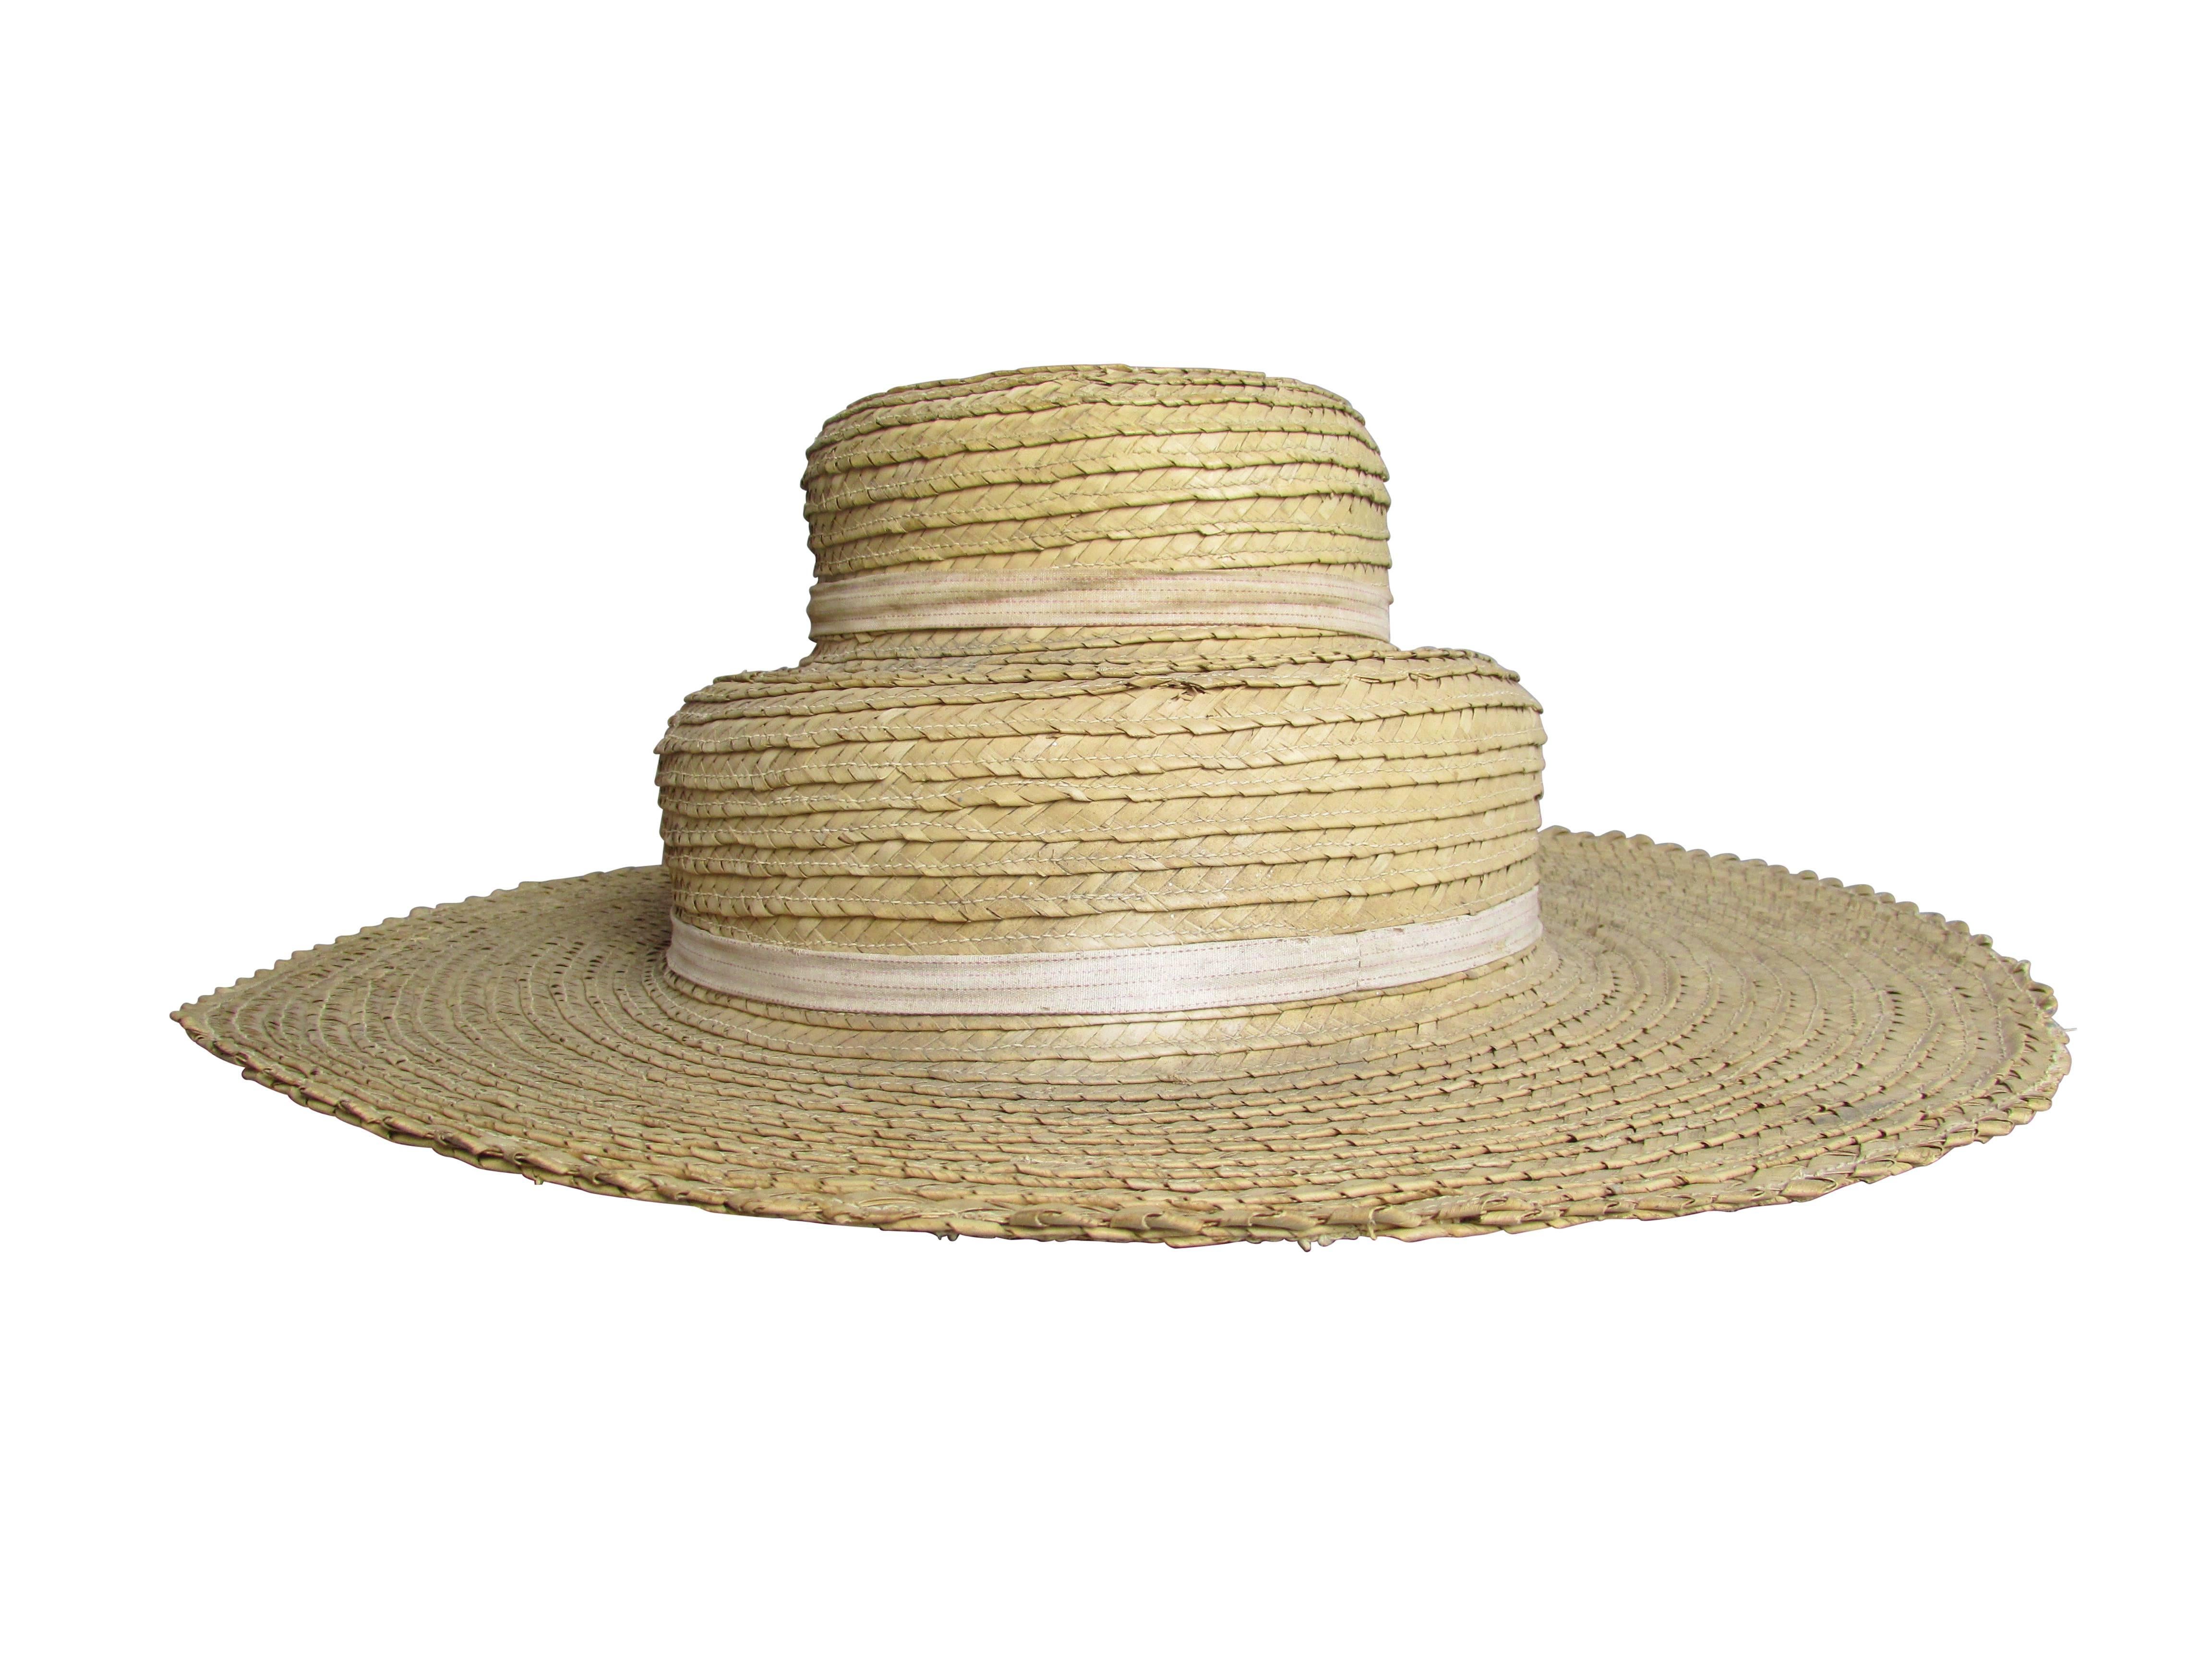 20th Century Early Two-Tiered Shaker Hat